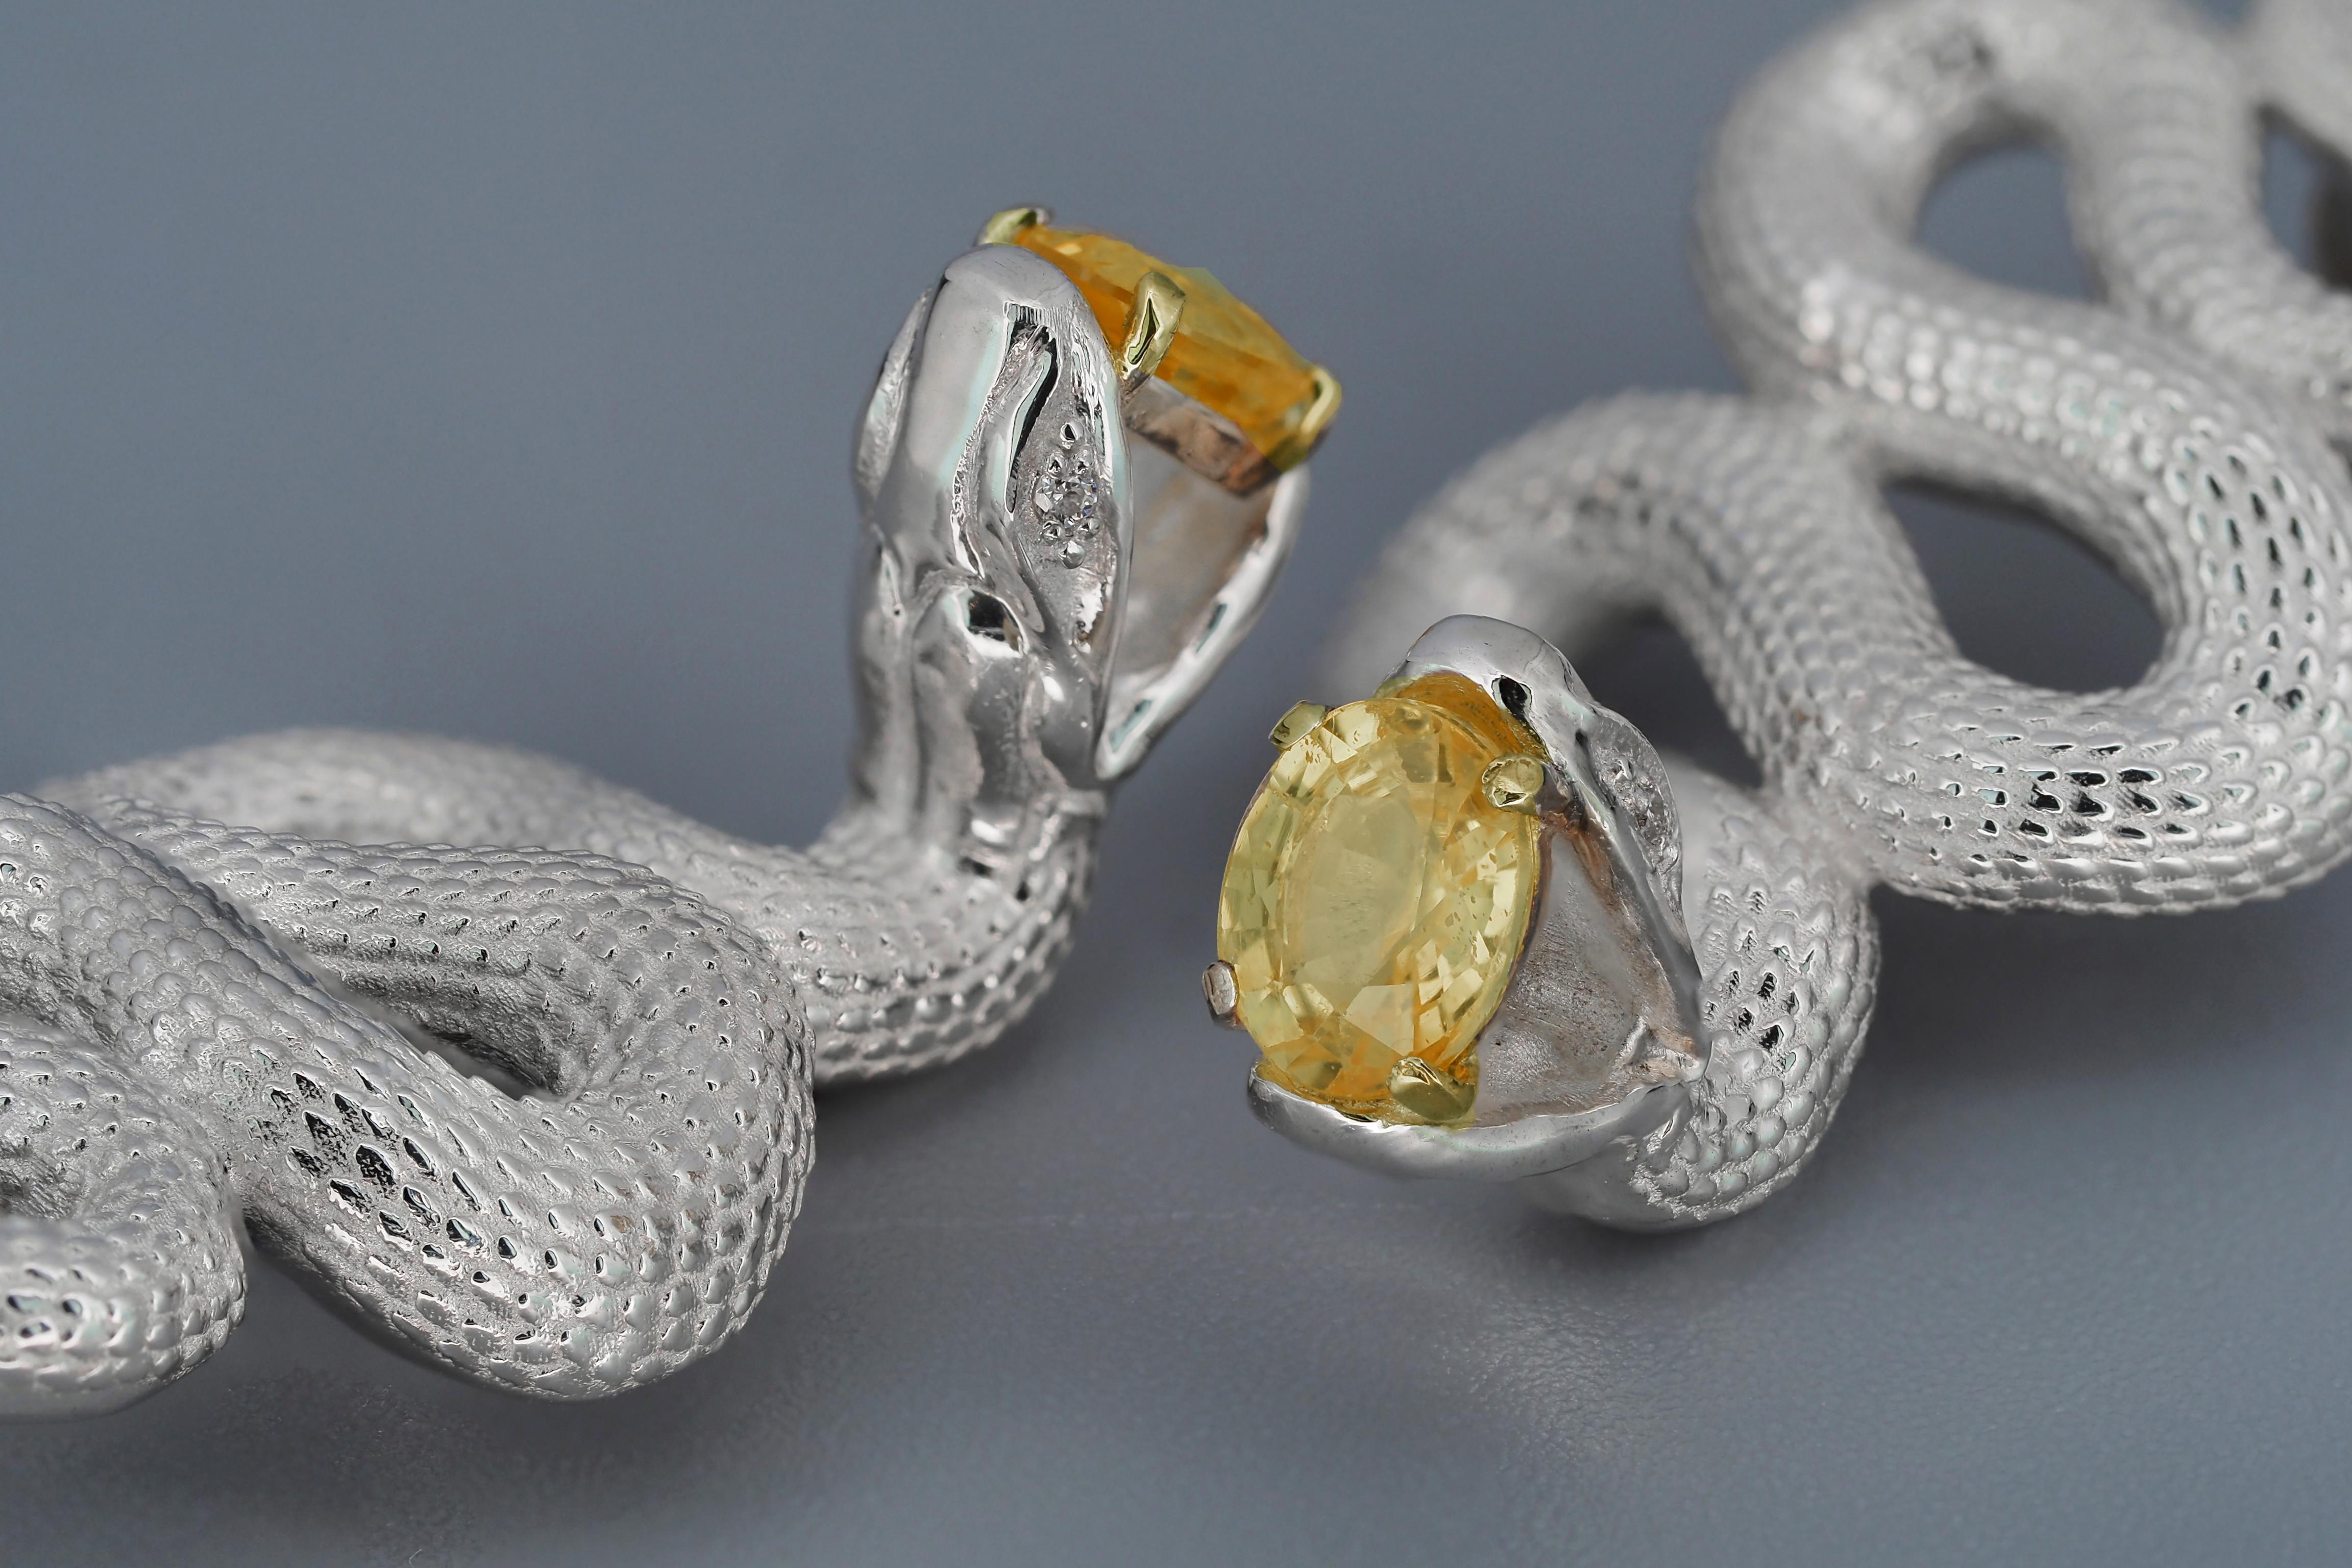 Massive Snake Earrings with Sapphires in Opened Mouth and Diamonds in Eyes For Sale 1